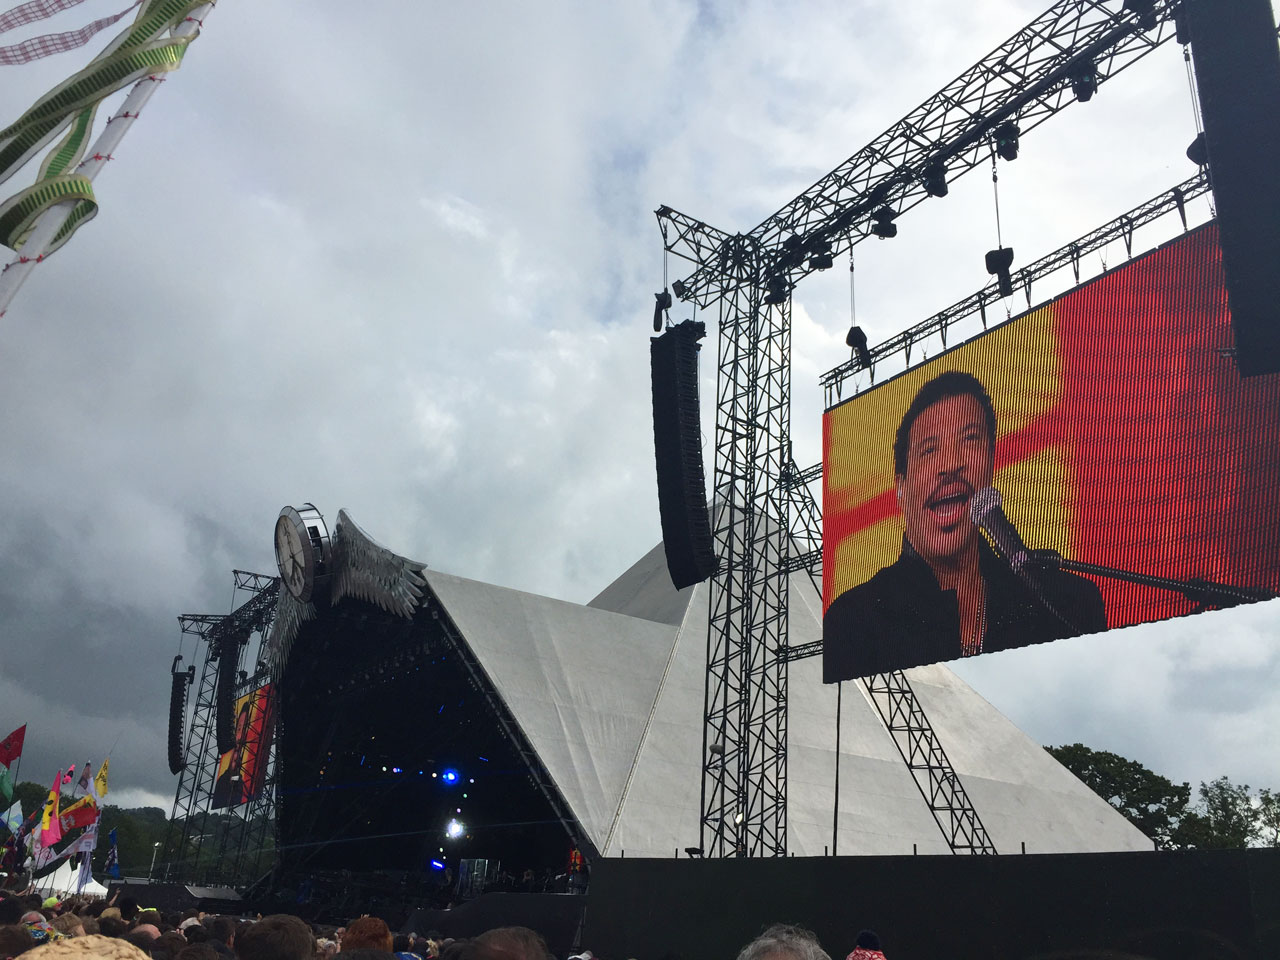 Lionel Richie plays the Pyramid Stage at Glastonbury 2015